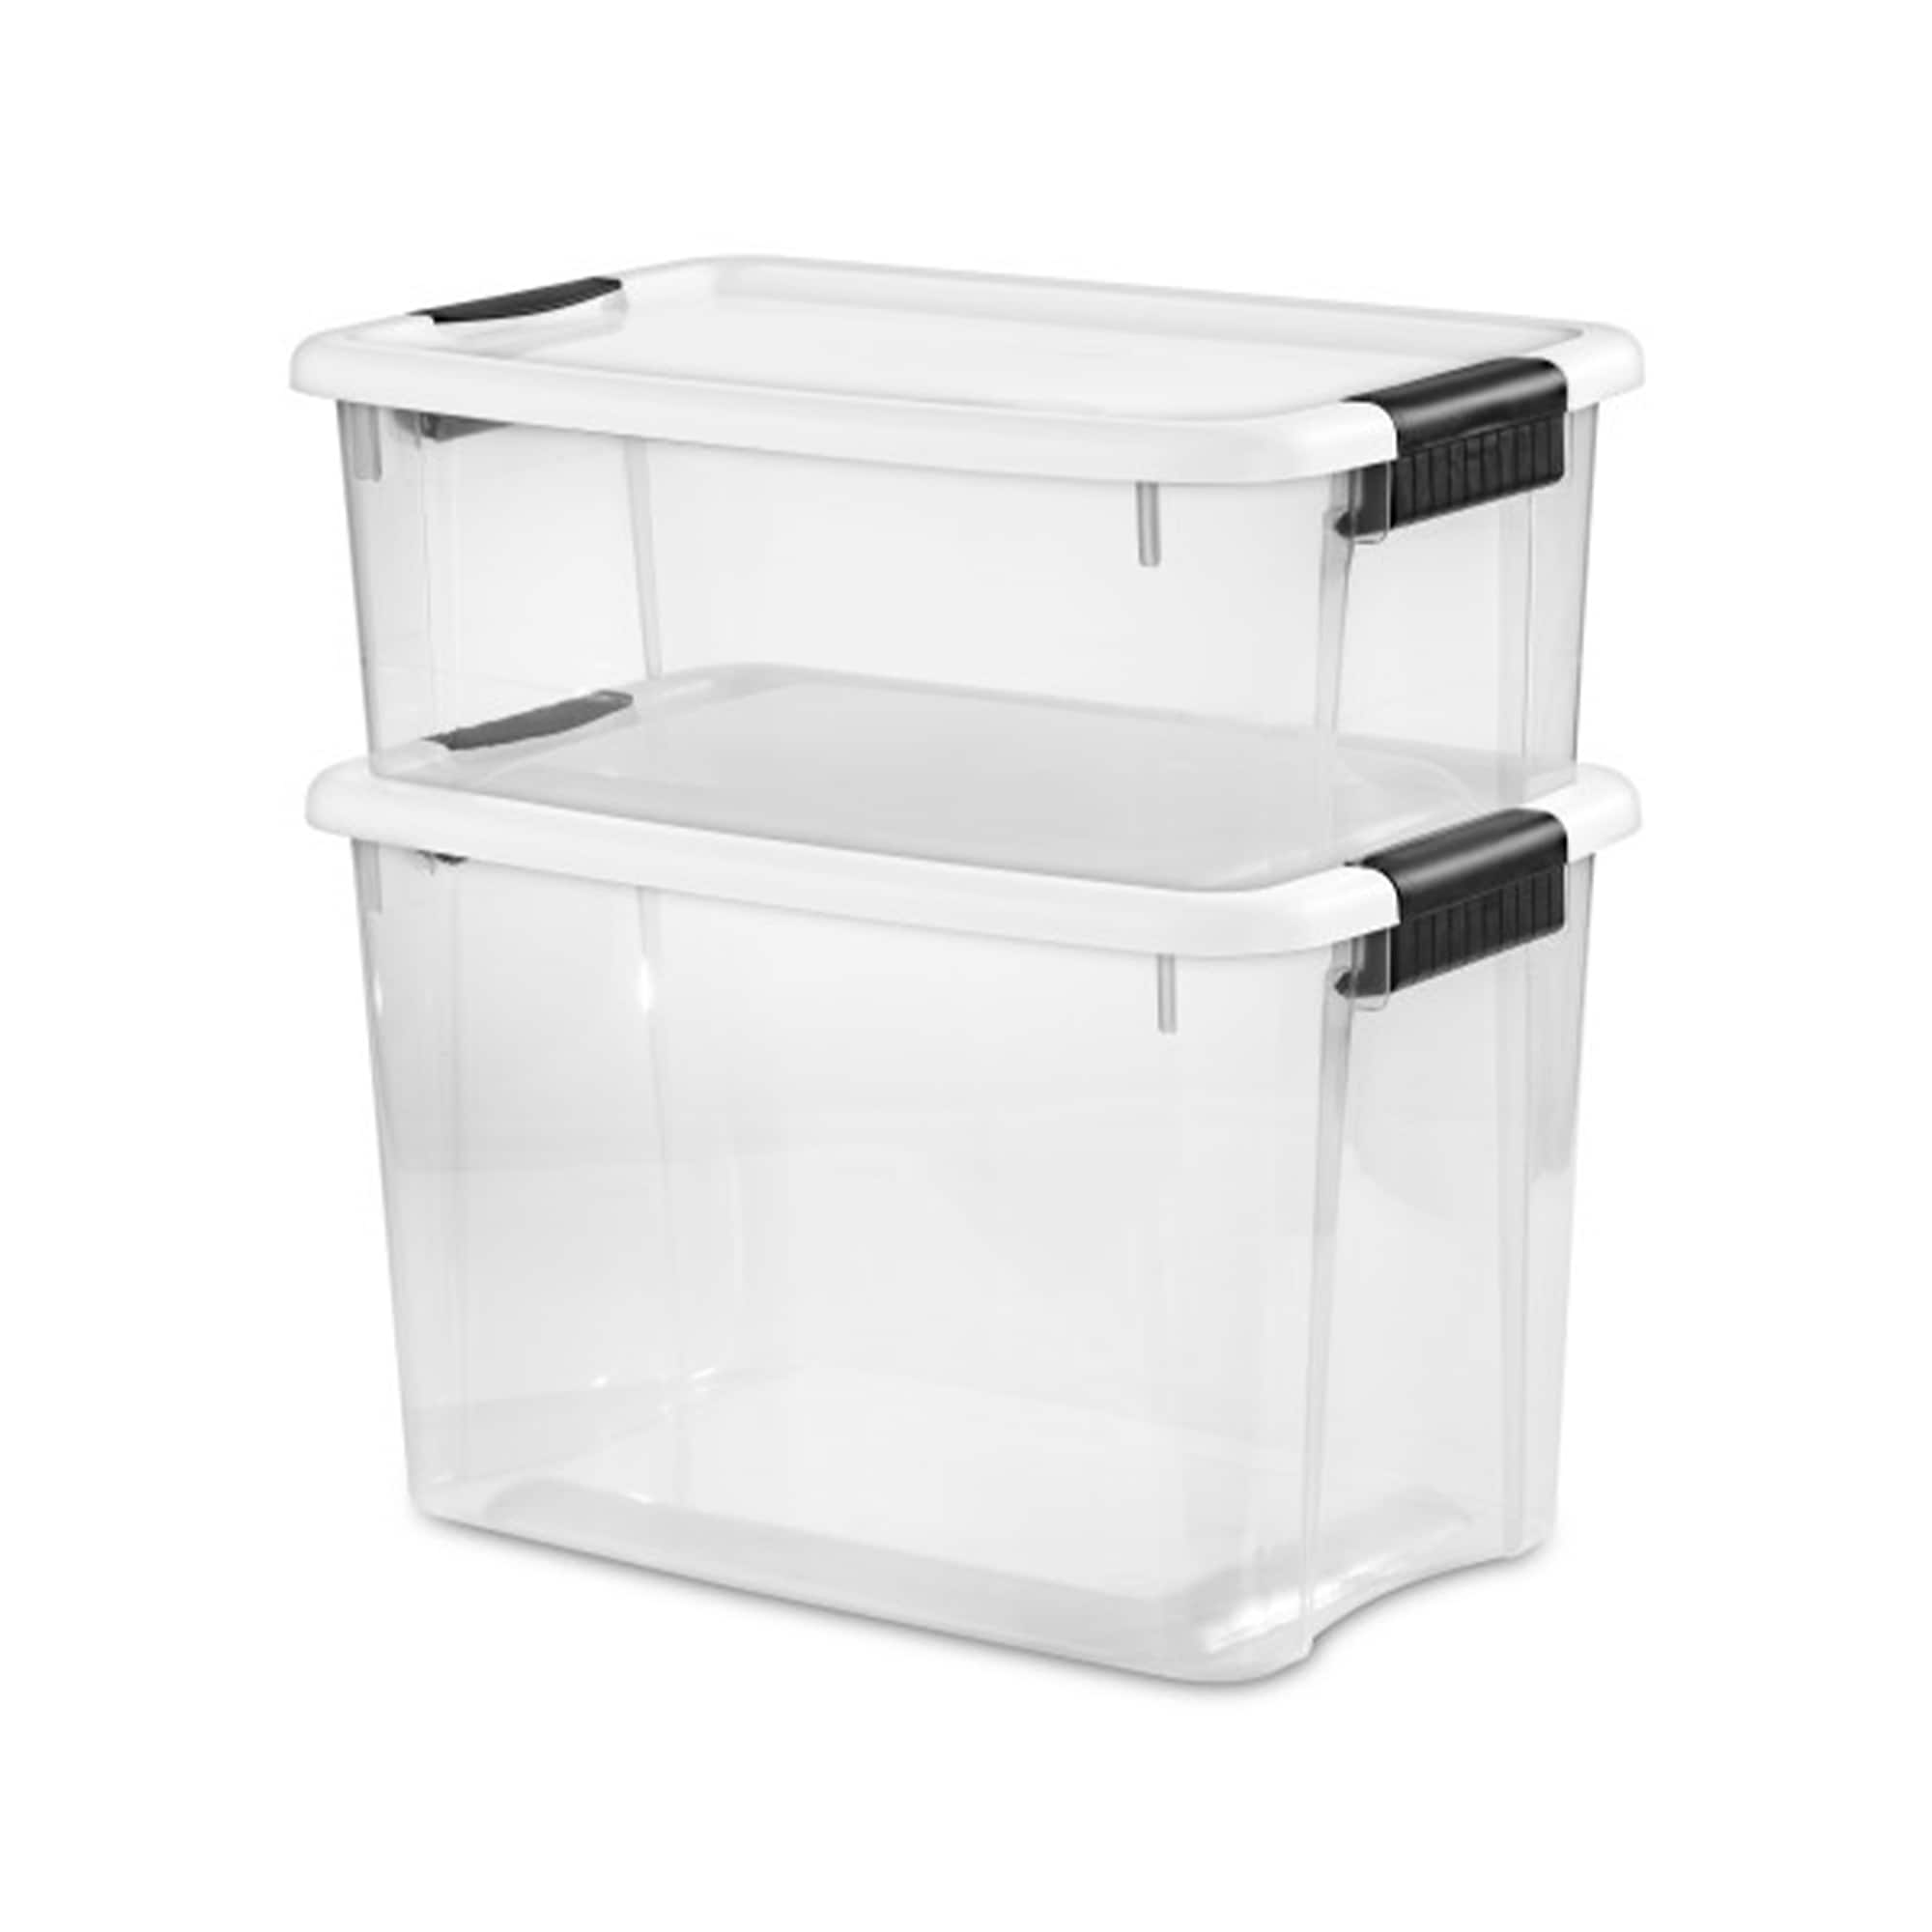 Sterilite 9.5 x 6.5 x 4 Inch Open Storage Bin with Carry Handles (48 Pack)  